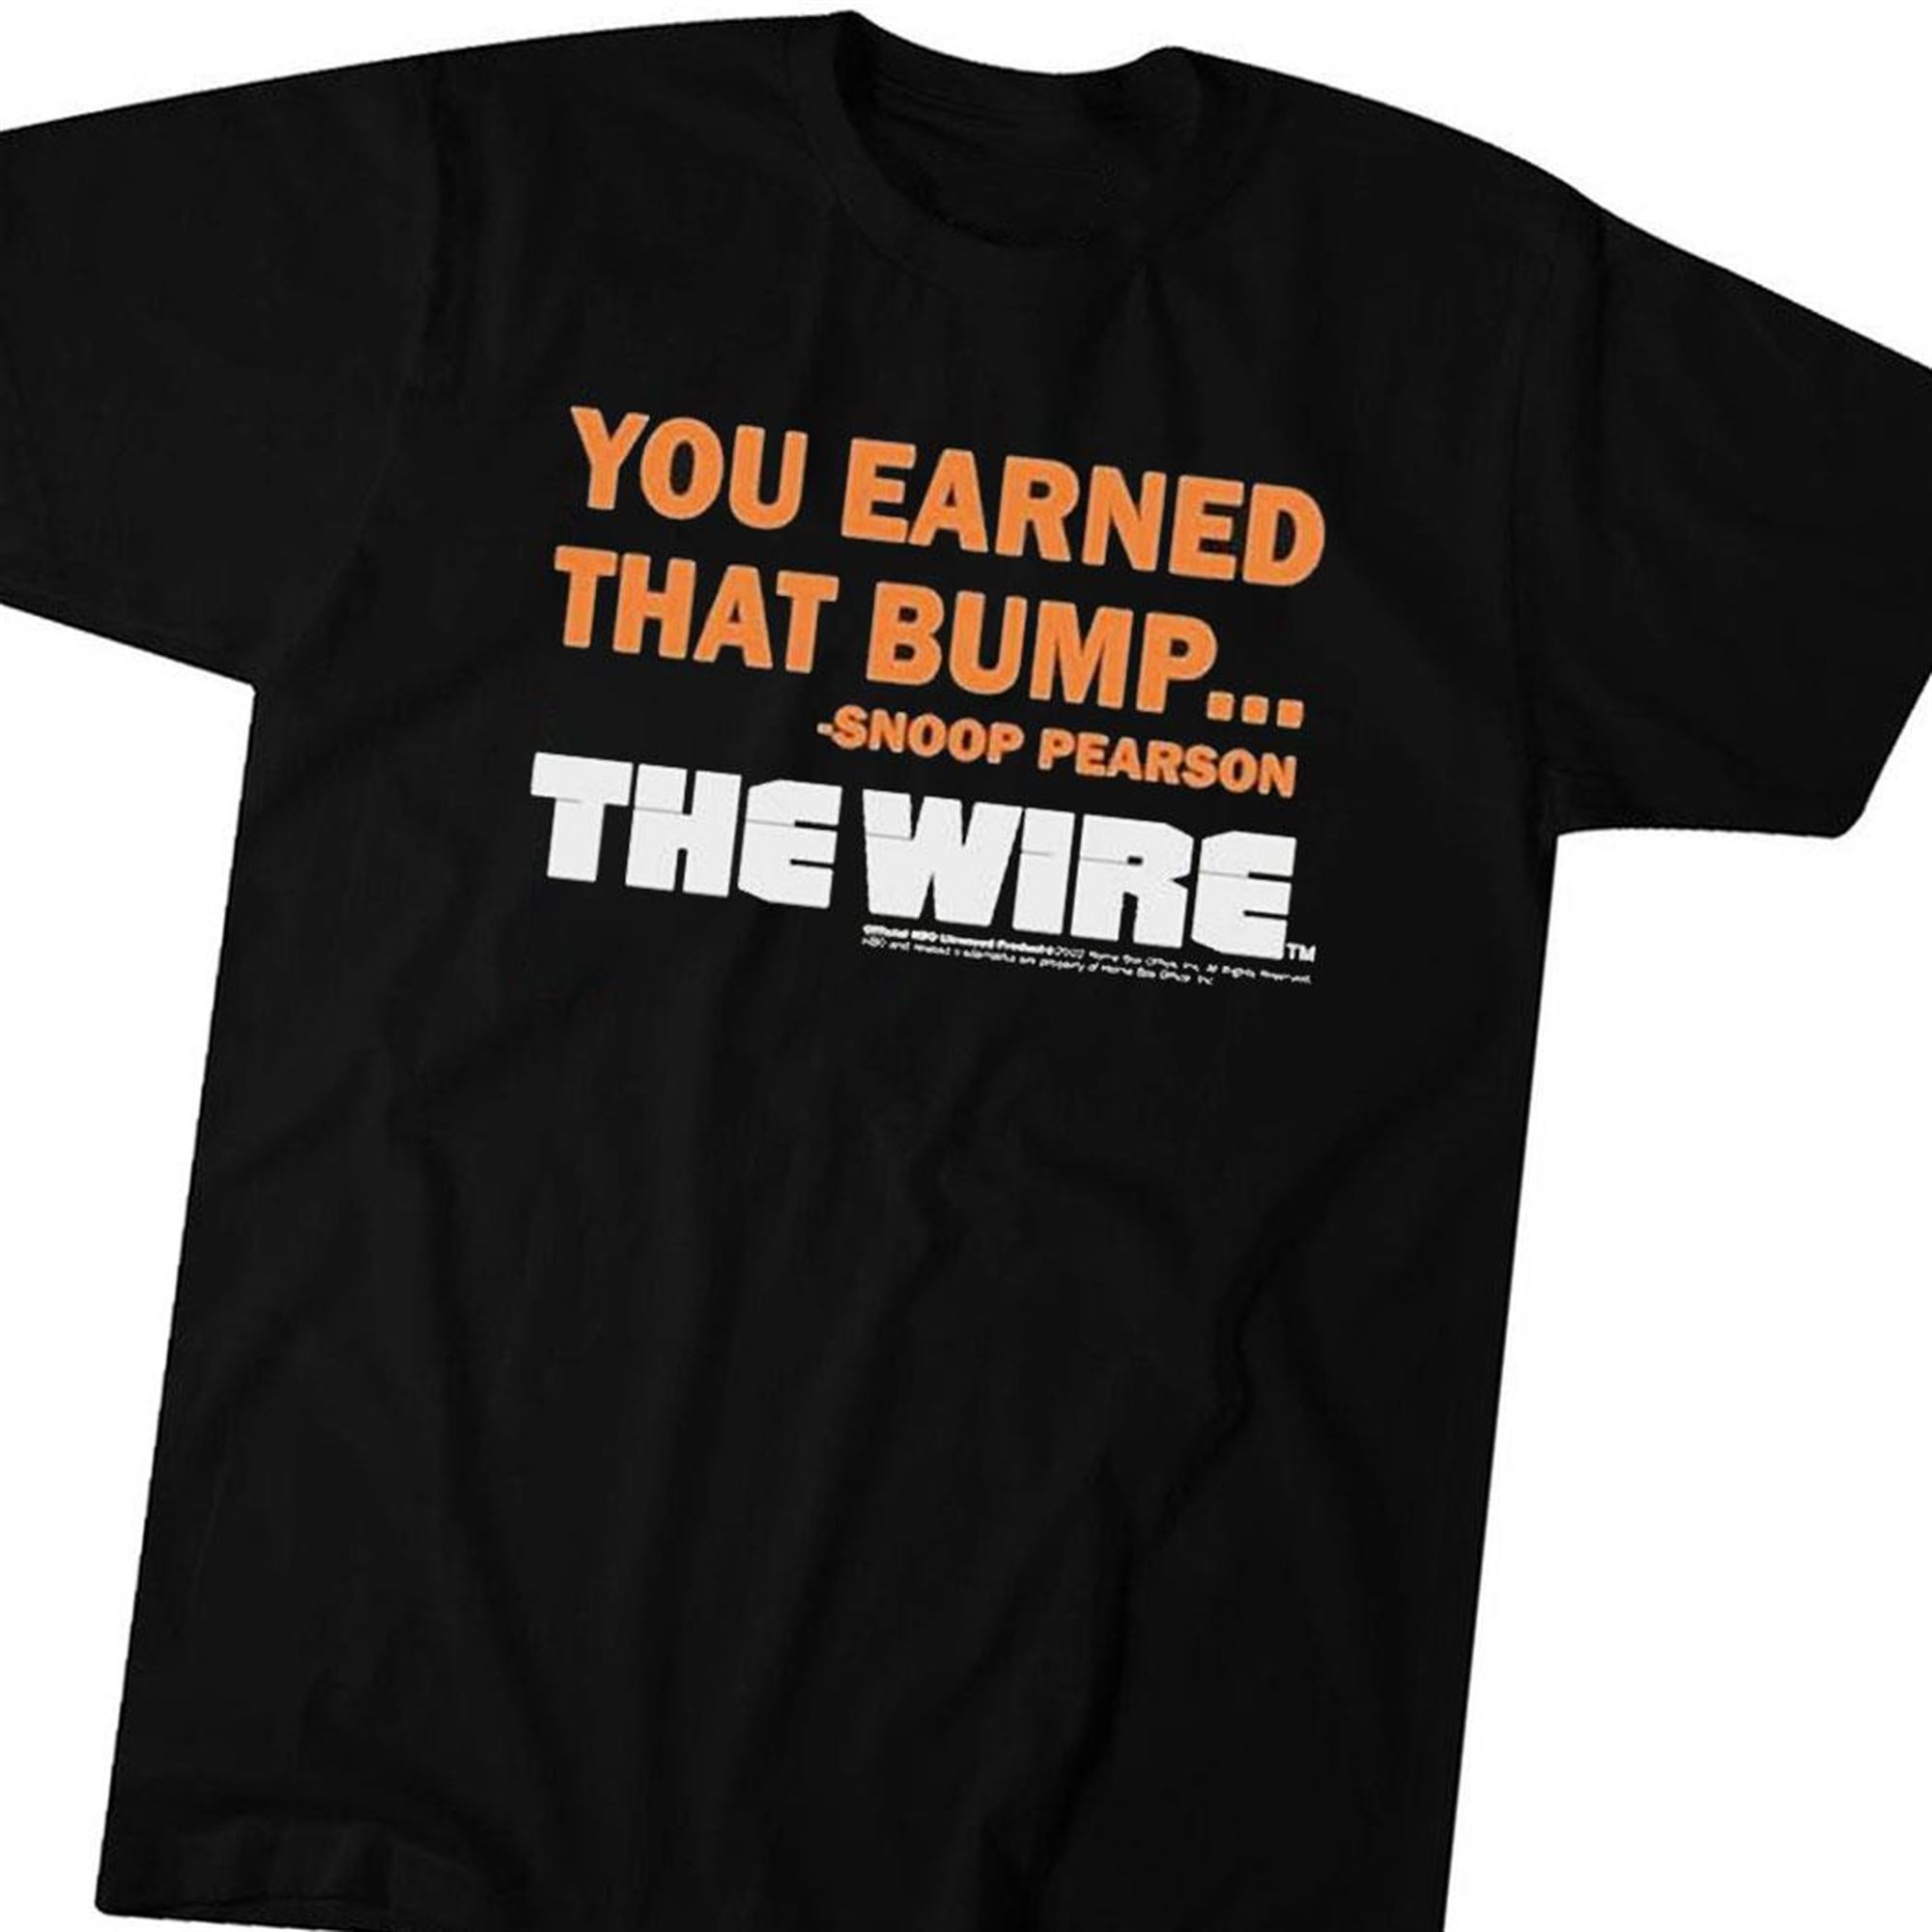 Official You Earned That Bump Snoop Pearson The Wire Shirt Ladies Tee